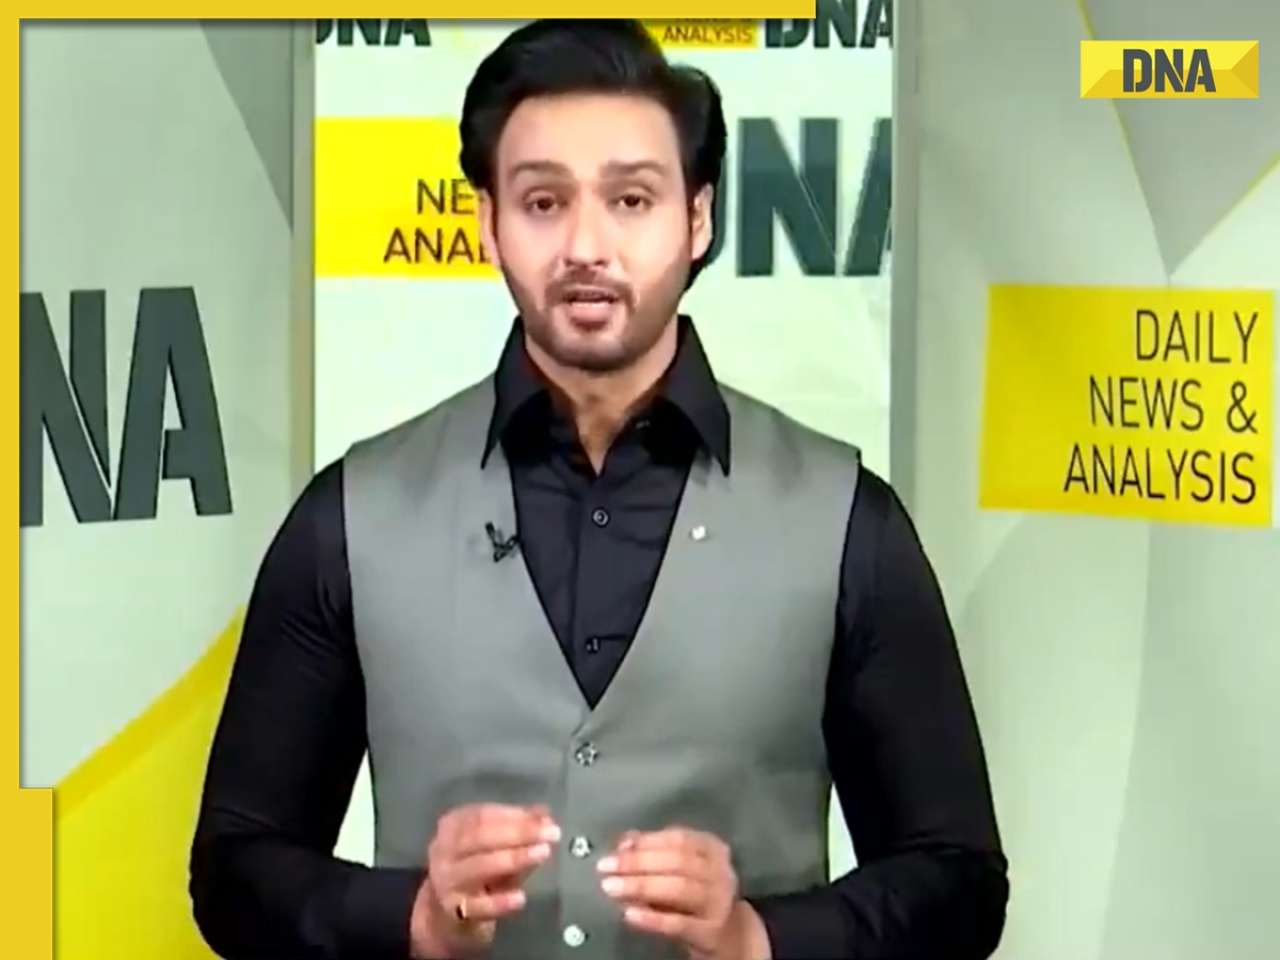 DNA TV Show: Analysis of energy and health drinks in India